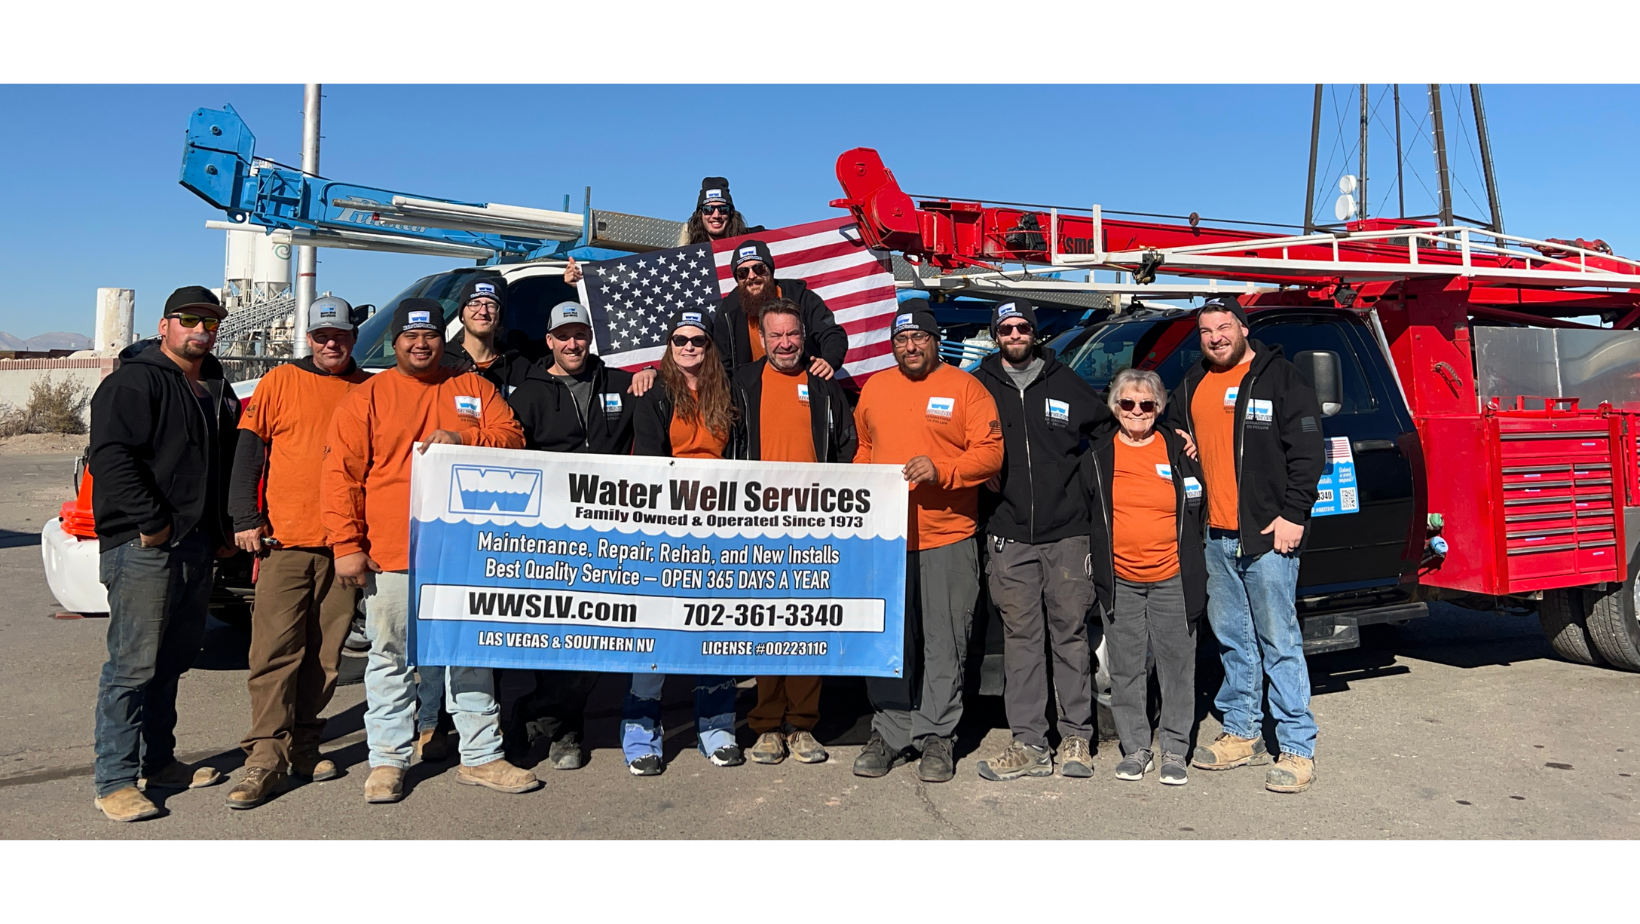 Water Well Services, Inc. team photo with red service truck in background.